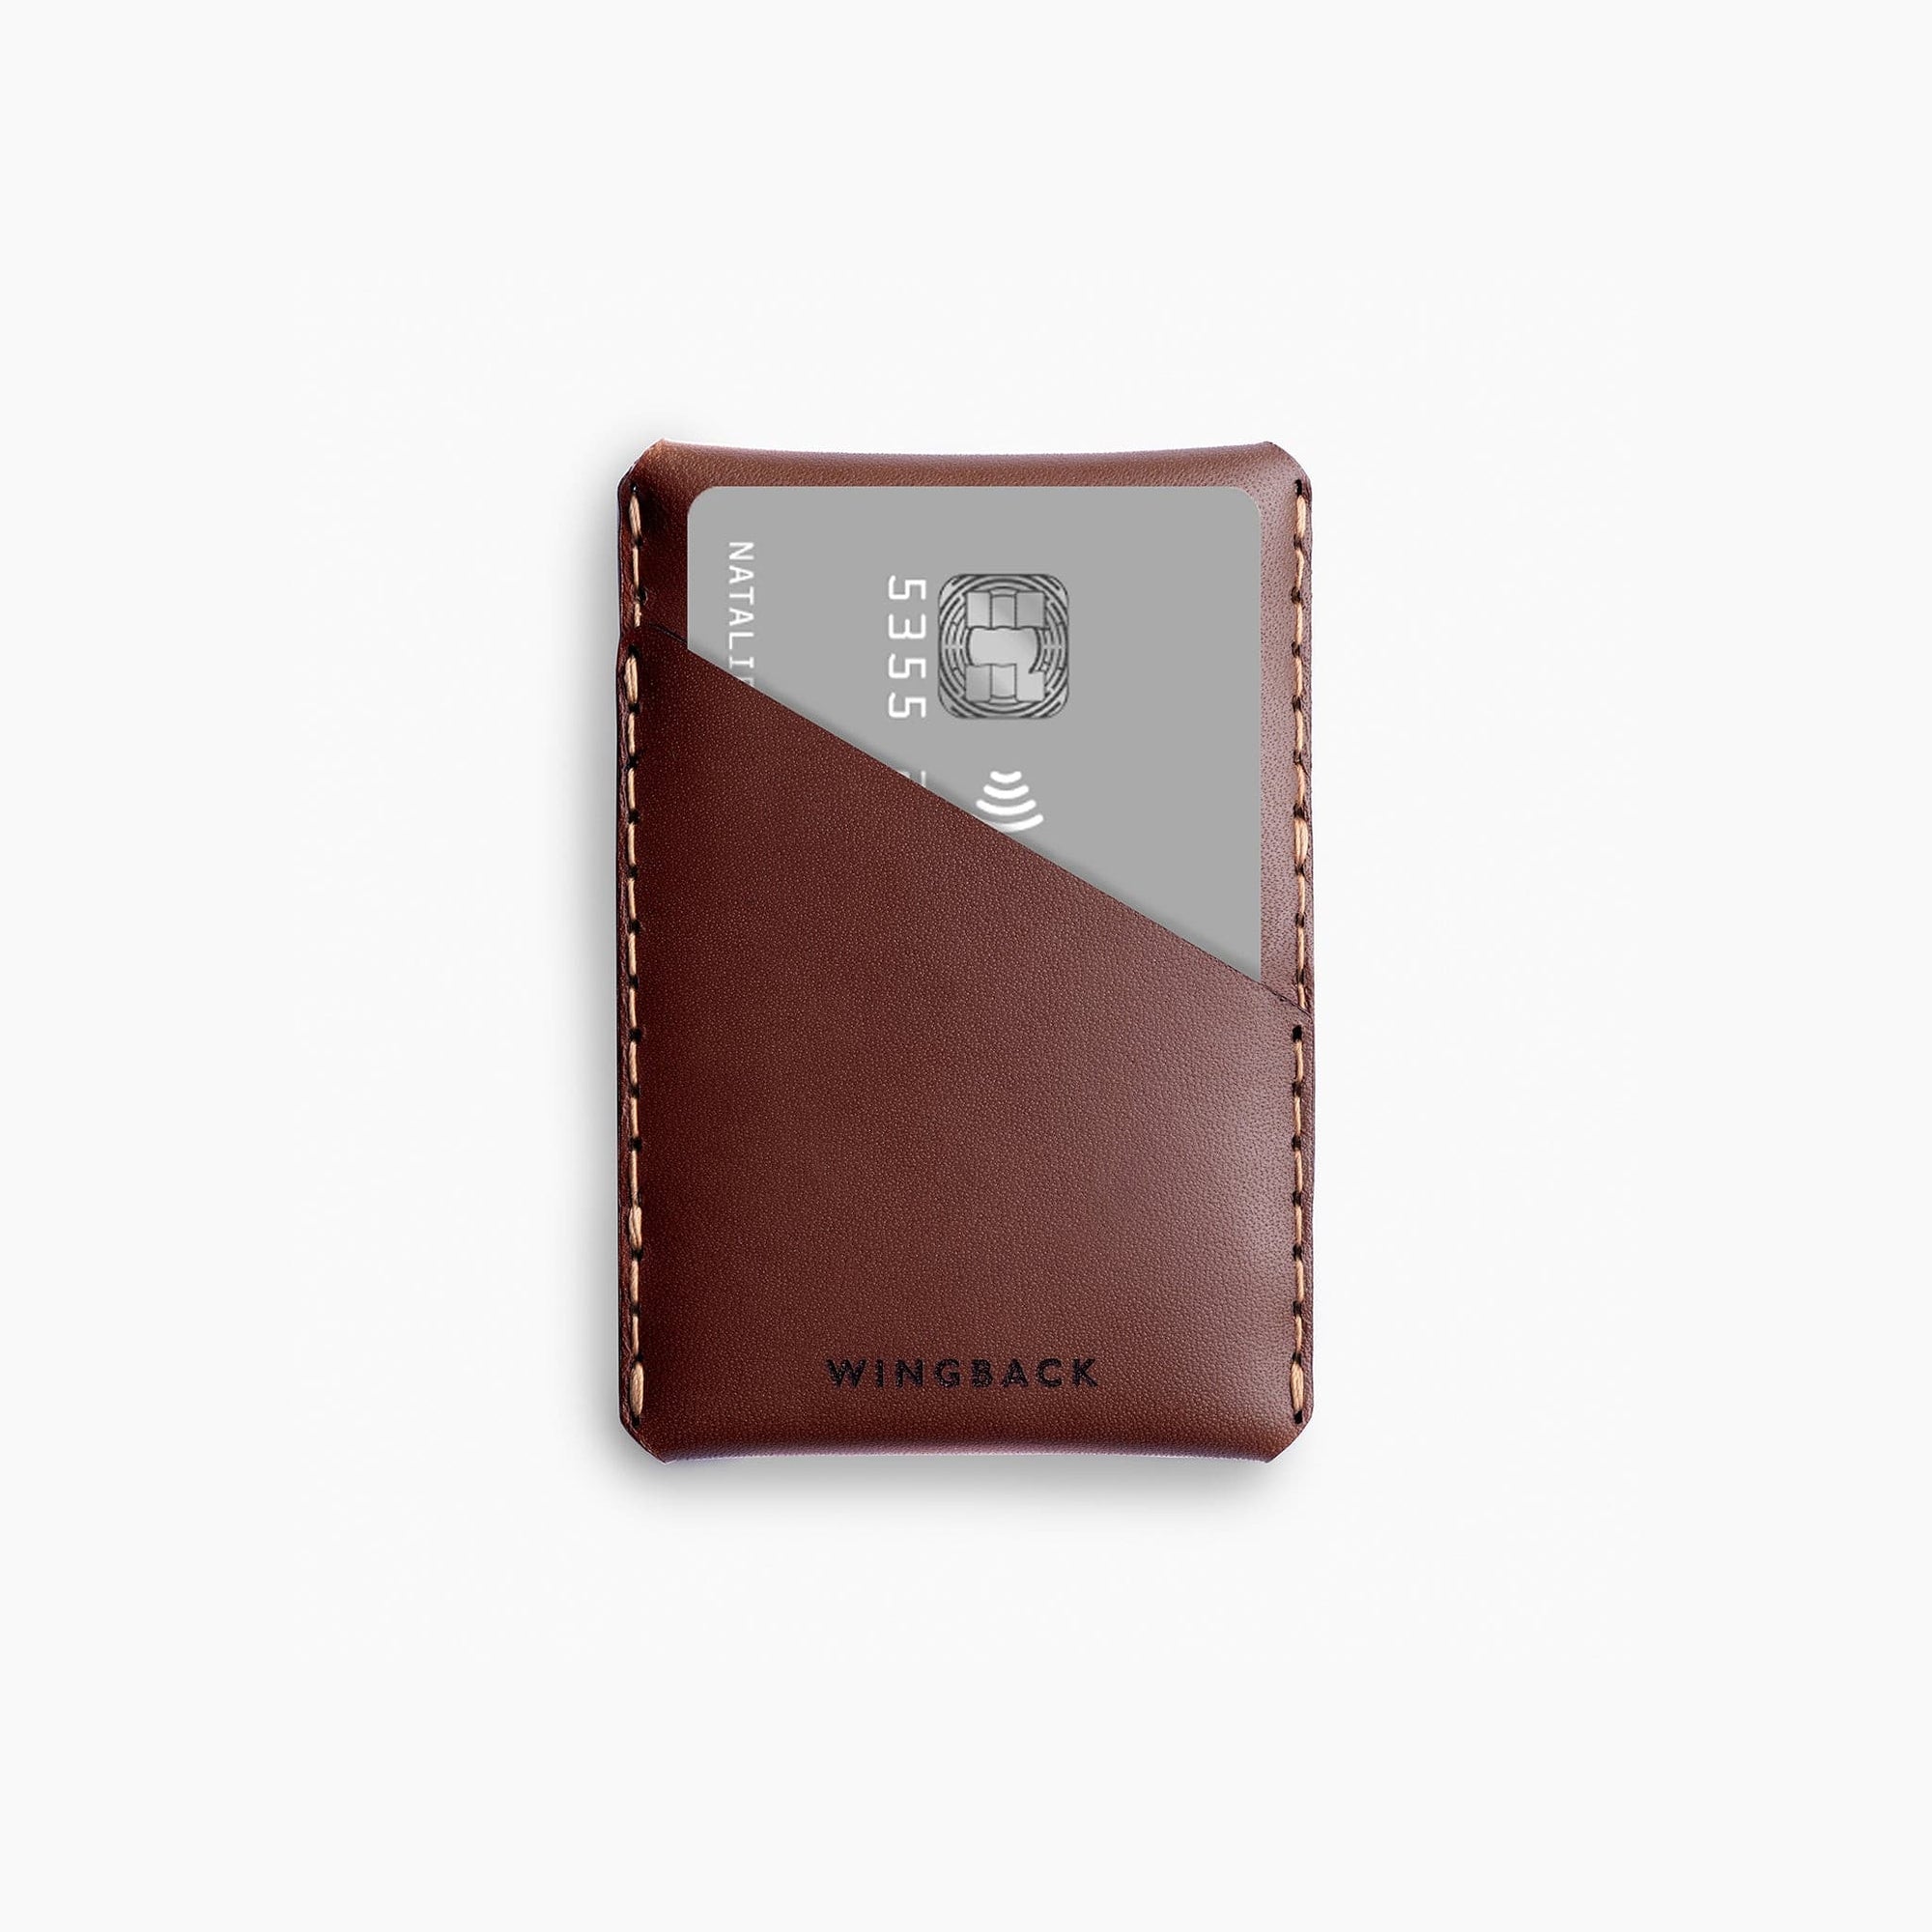 Winston Card Holder - Chestnut made in England by Wingback.